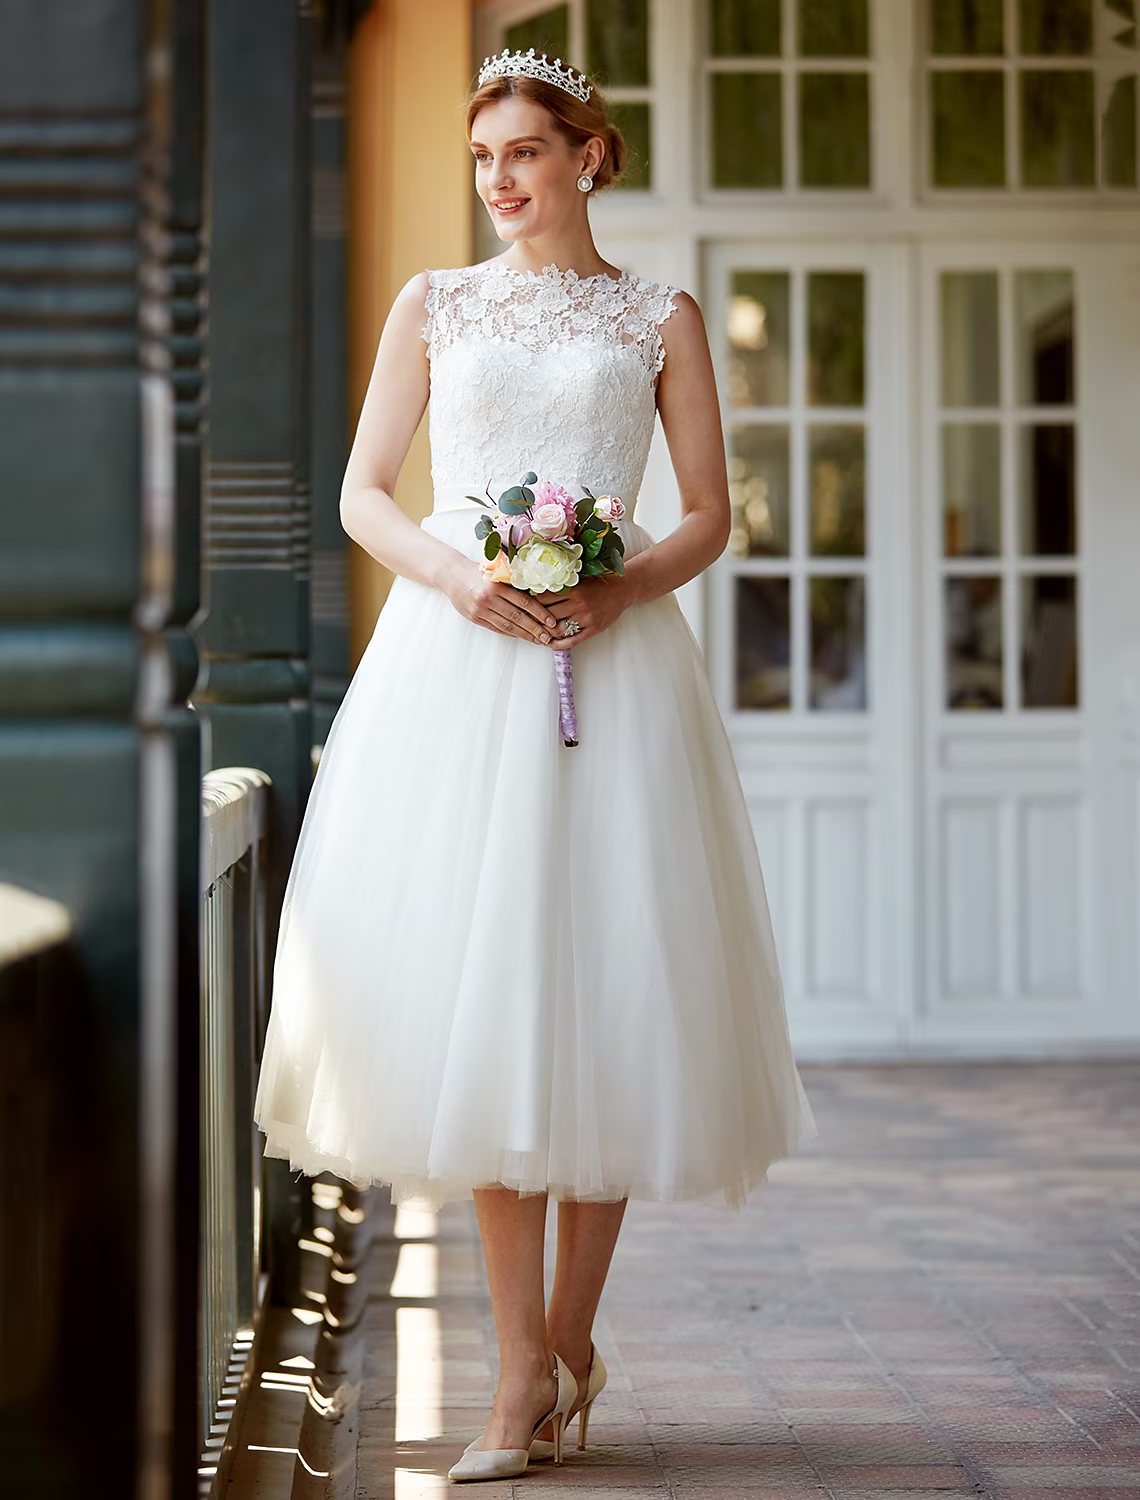 Little White Dresses Wedding Dresses Length A-Line Regular Straps Neck Lace Over Tulle With Buttons